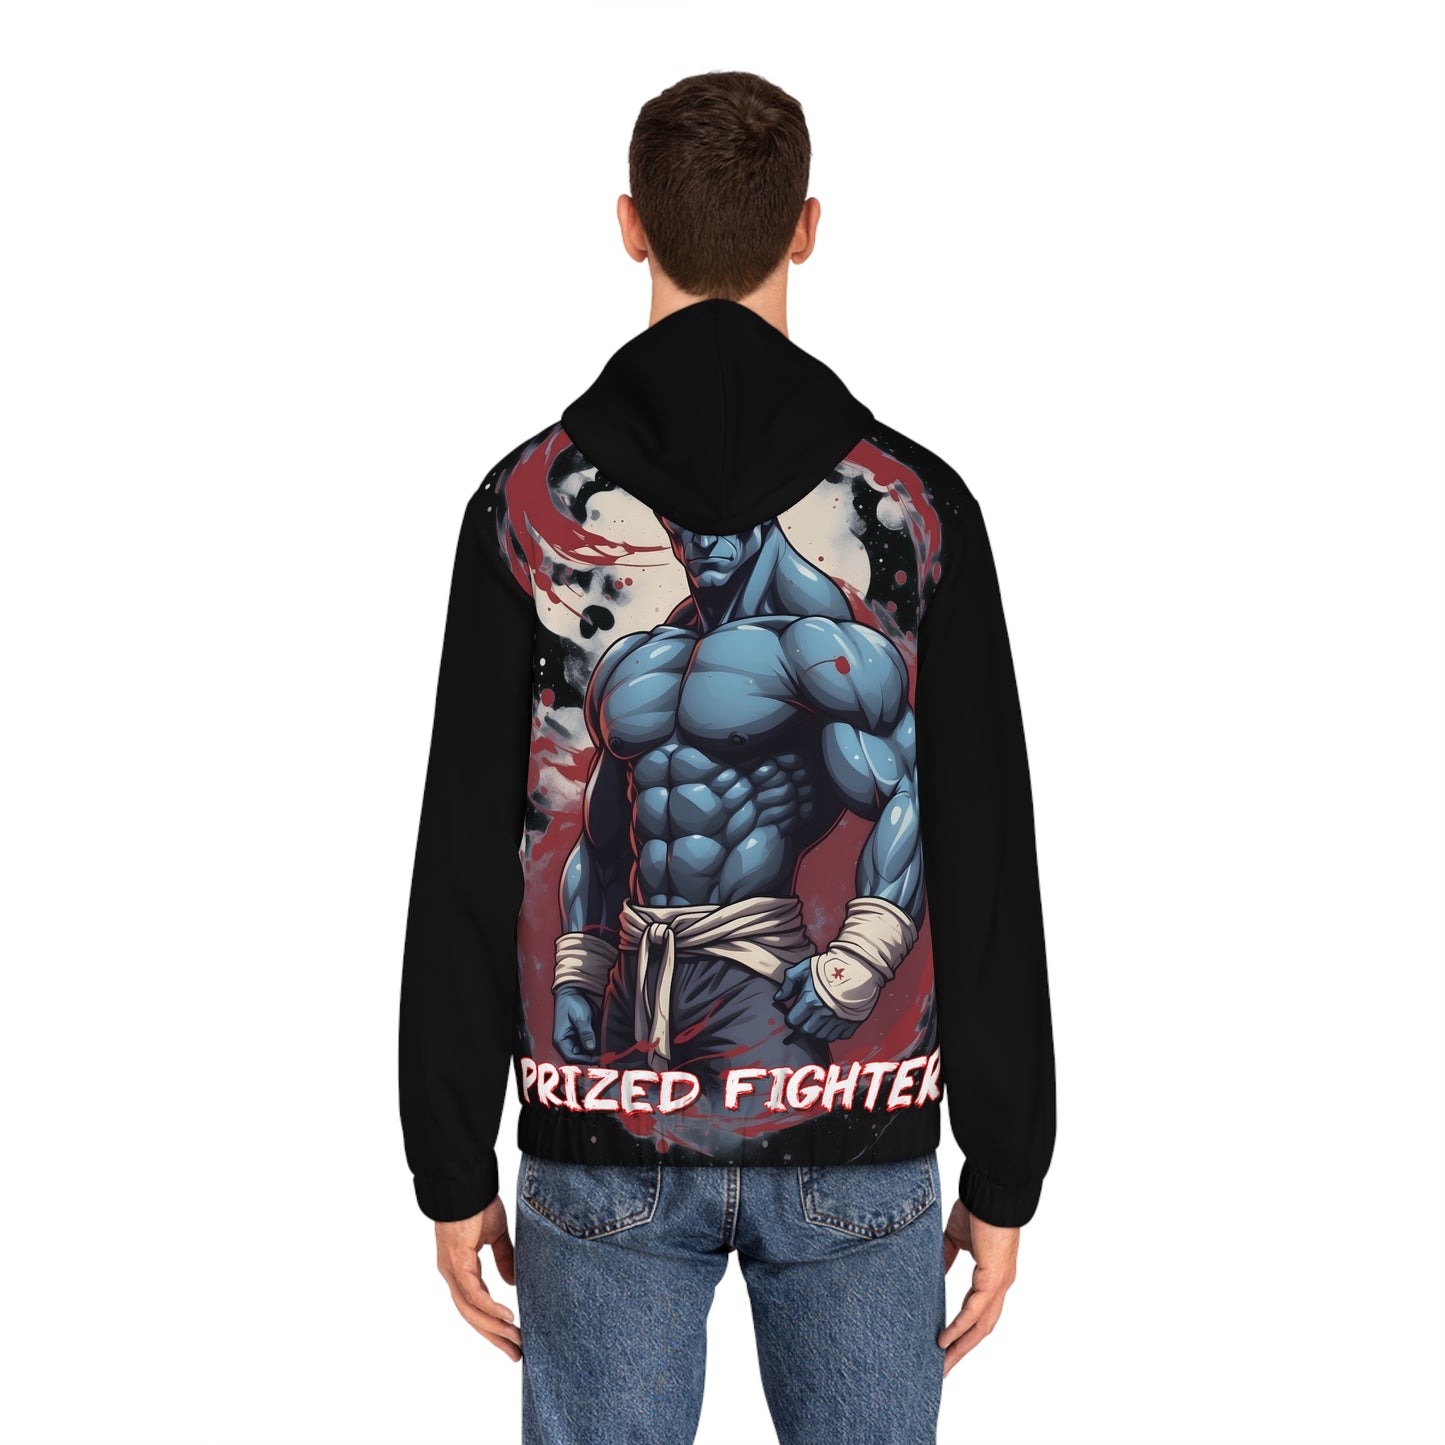 Kǎtōng Piàn - Prized Fighter Collection - America - 010 - Men's Full-Zip Hoodie